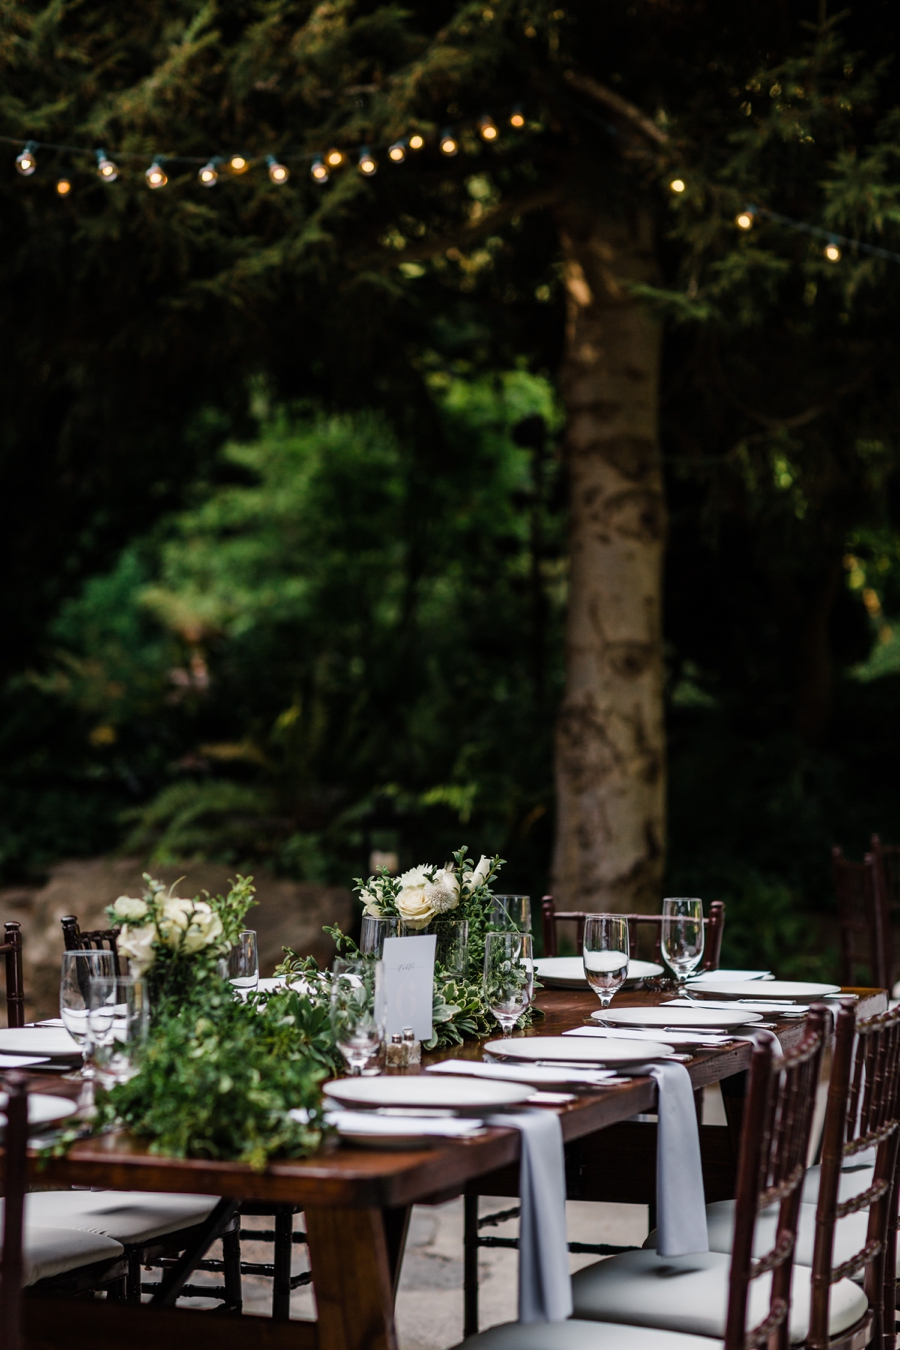 Rented wedding decor and long wooden tables for an eco-friendly wedding at JM Cellars photographed by Seattle wedding photographer Amy Galbraith